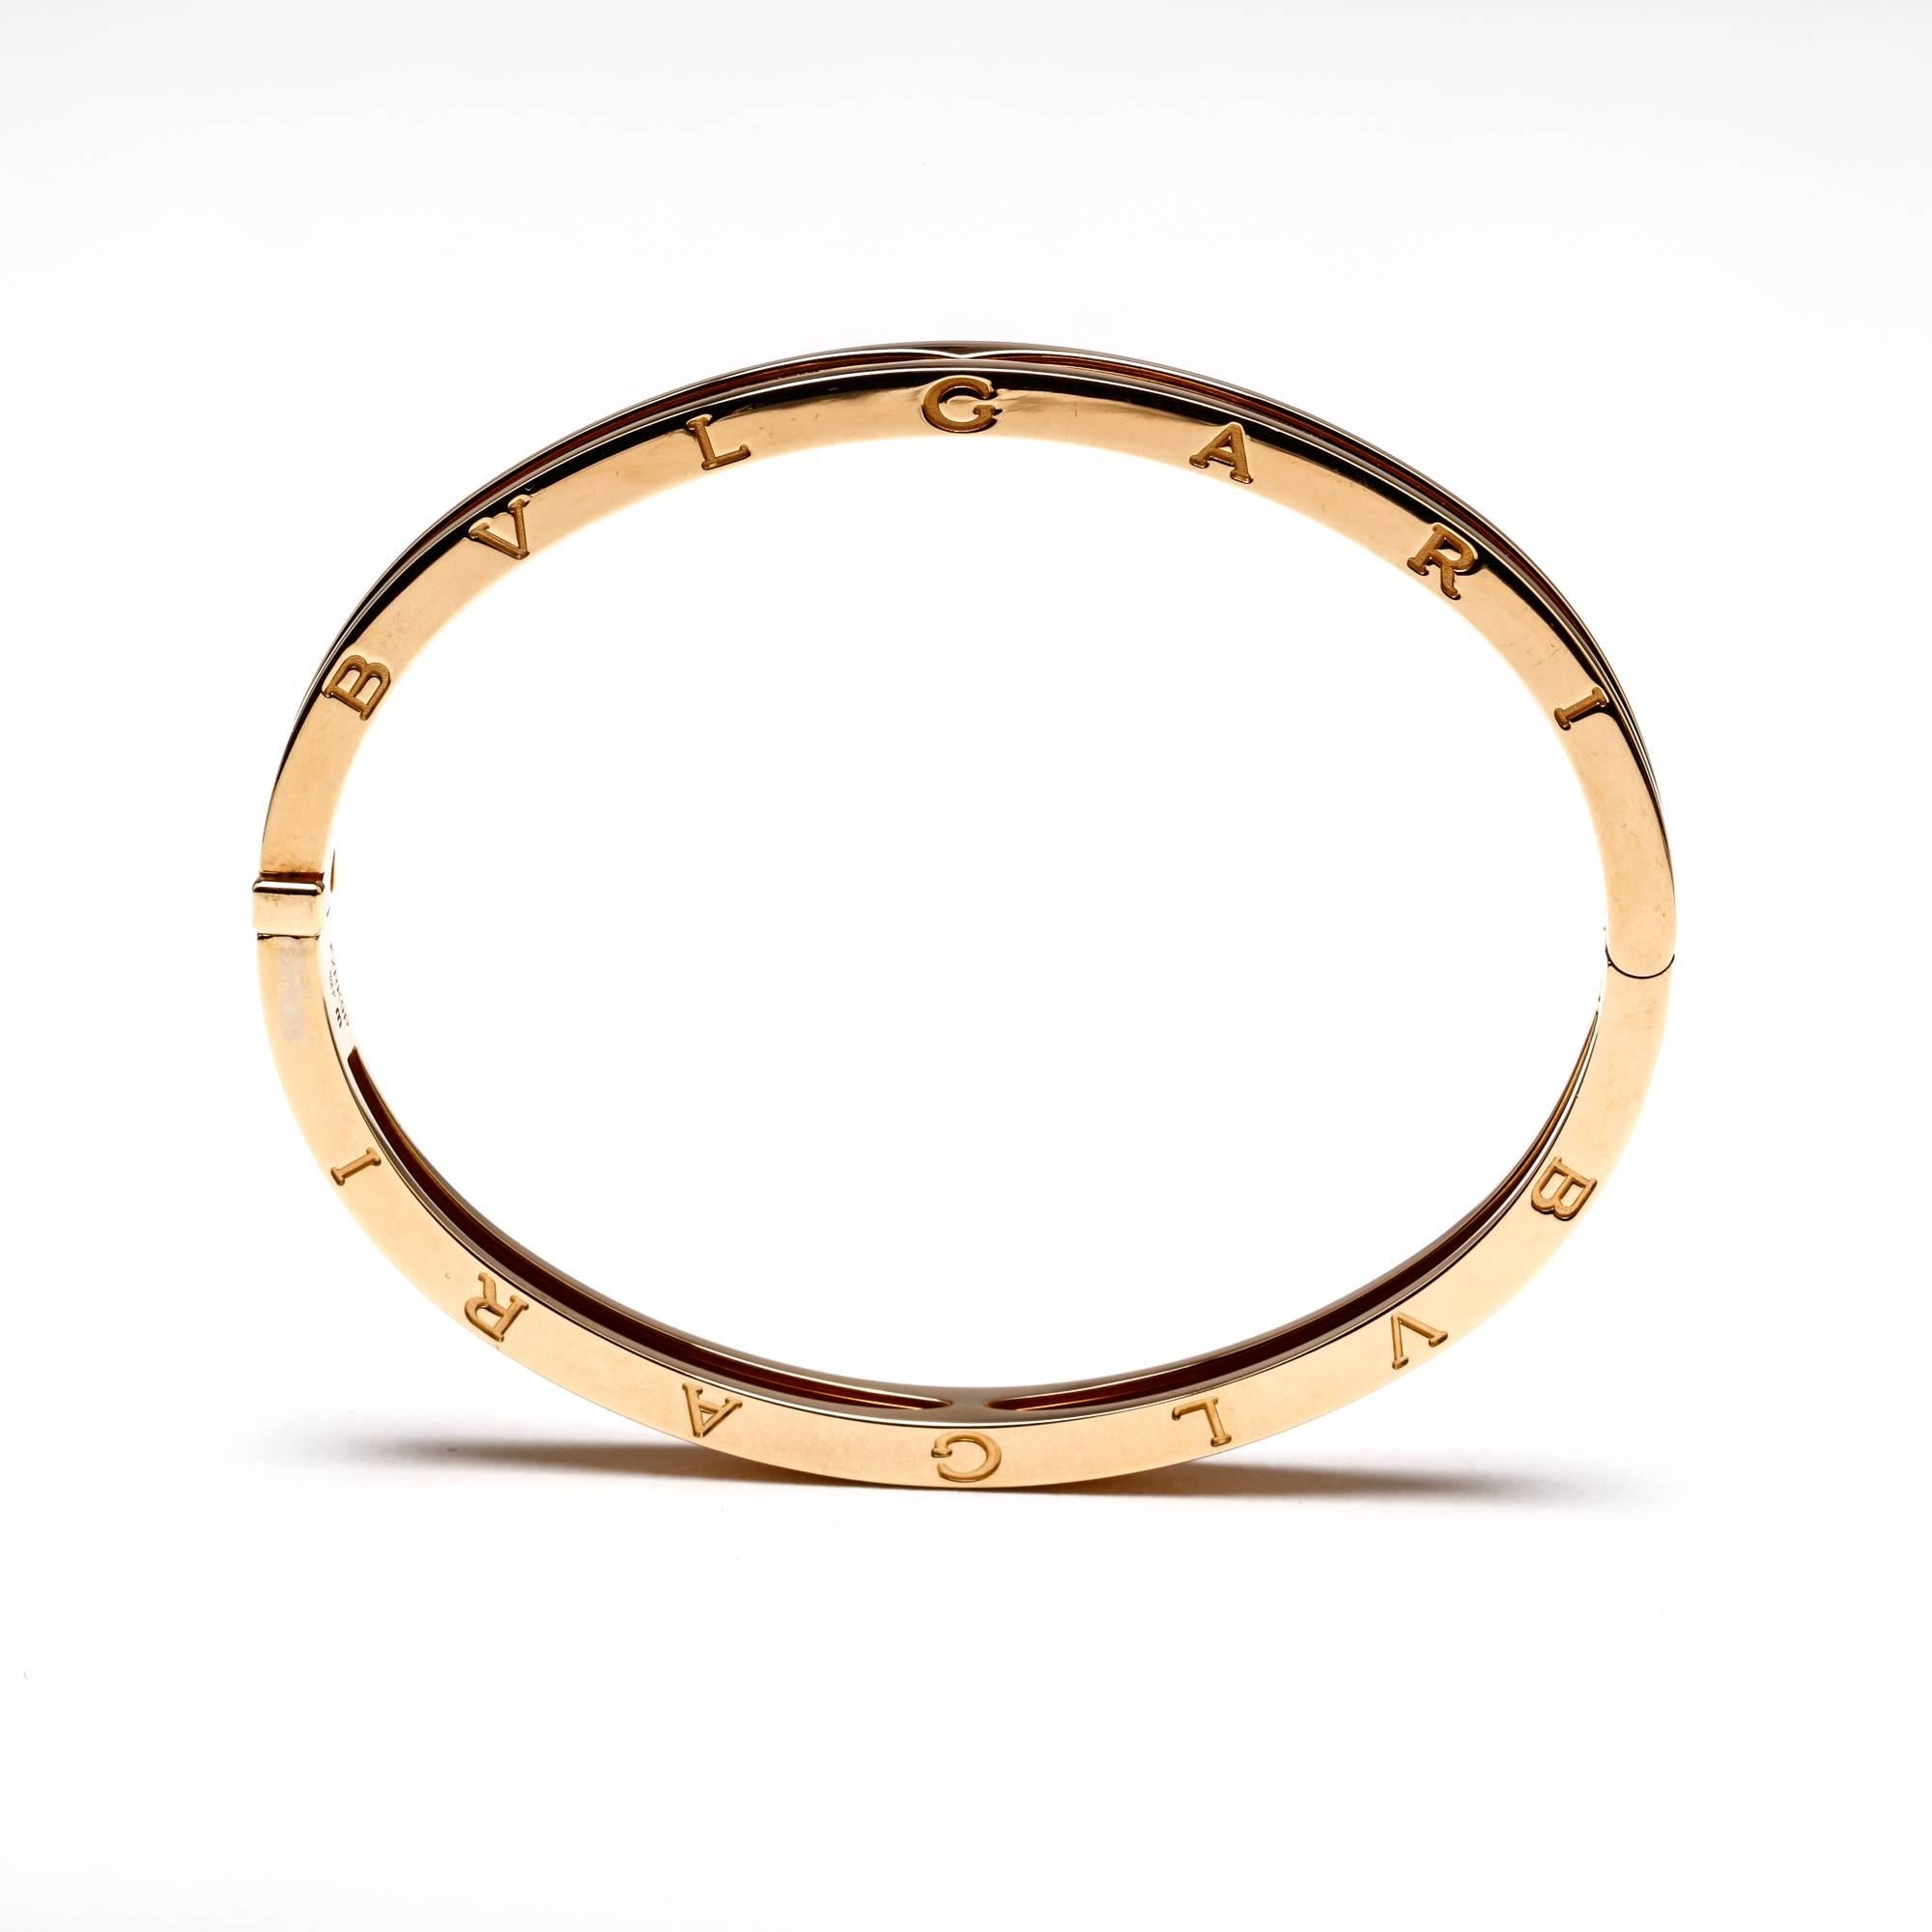 Inspired by the Colosseum in Rome, this 18k yellow gold Bulgari B.zero1 bangle bracelet in size medium represents both the eternal city and modern Italian design. The push-button closure makes for effortless and comfortable removal. This item is in